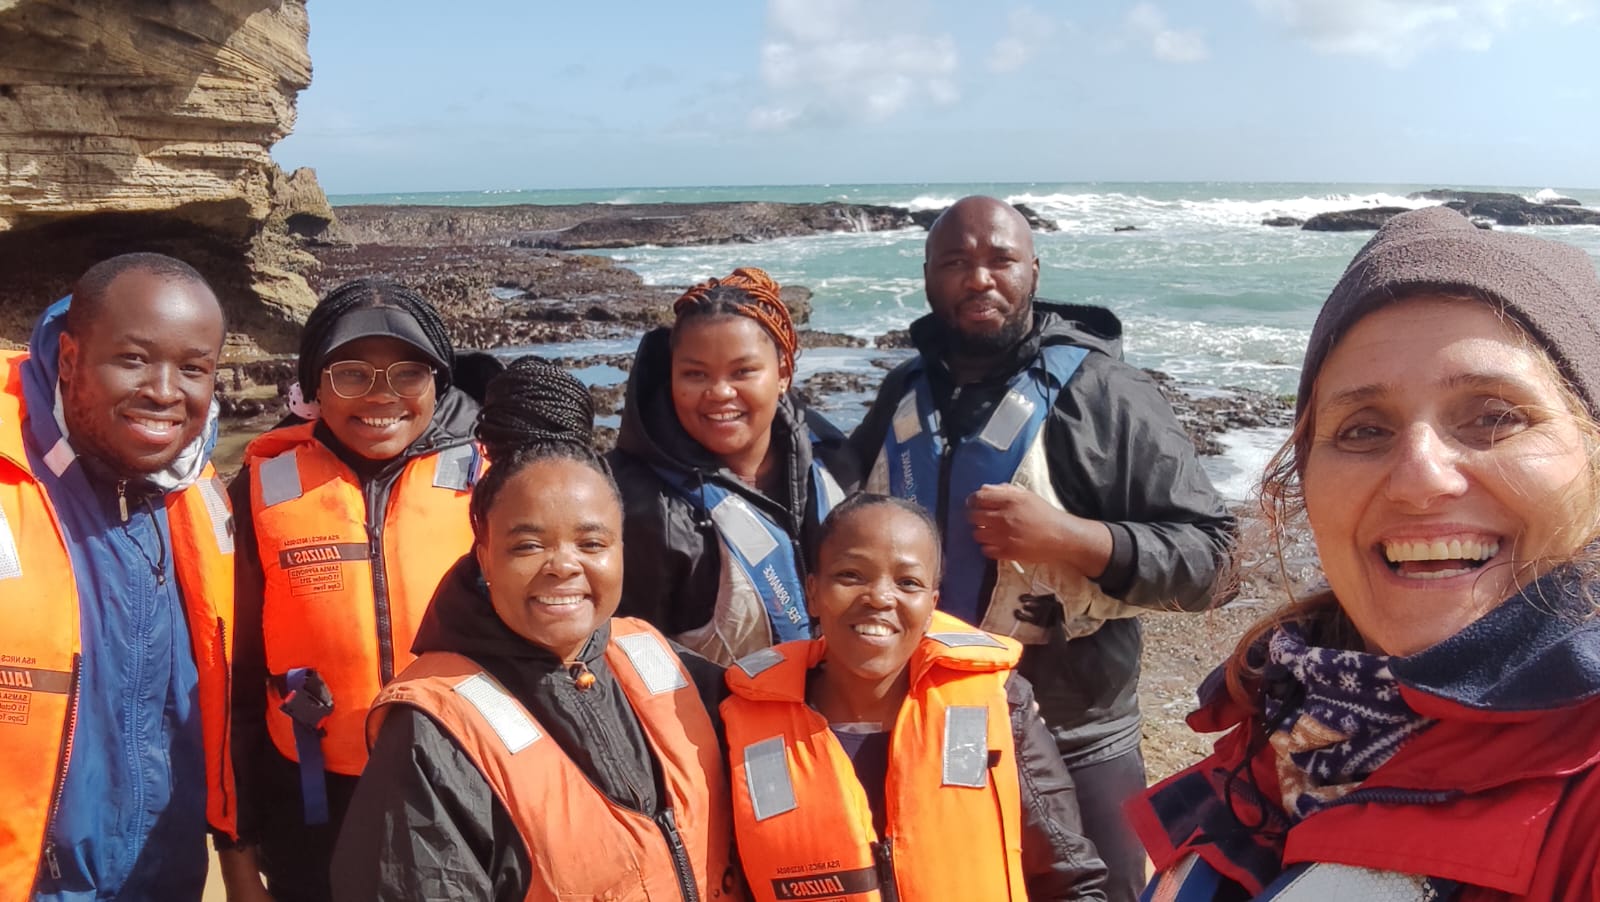 POSTDOCTORAL POSITION TO JOIN THE “INDIGENOUS MARINE INNOVATIONS FOR SUSTAINABLE ENVIRONMENTS AND ECONOMIES (IMIsEE)PROJECT” IN SOUTH AFRICA.